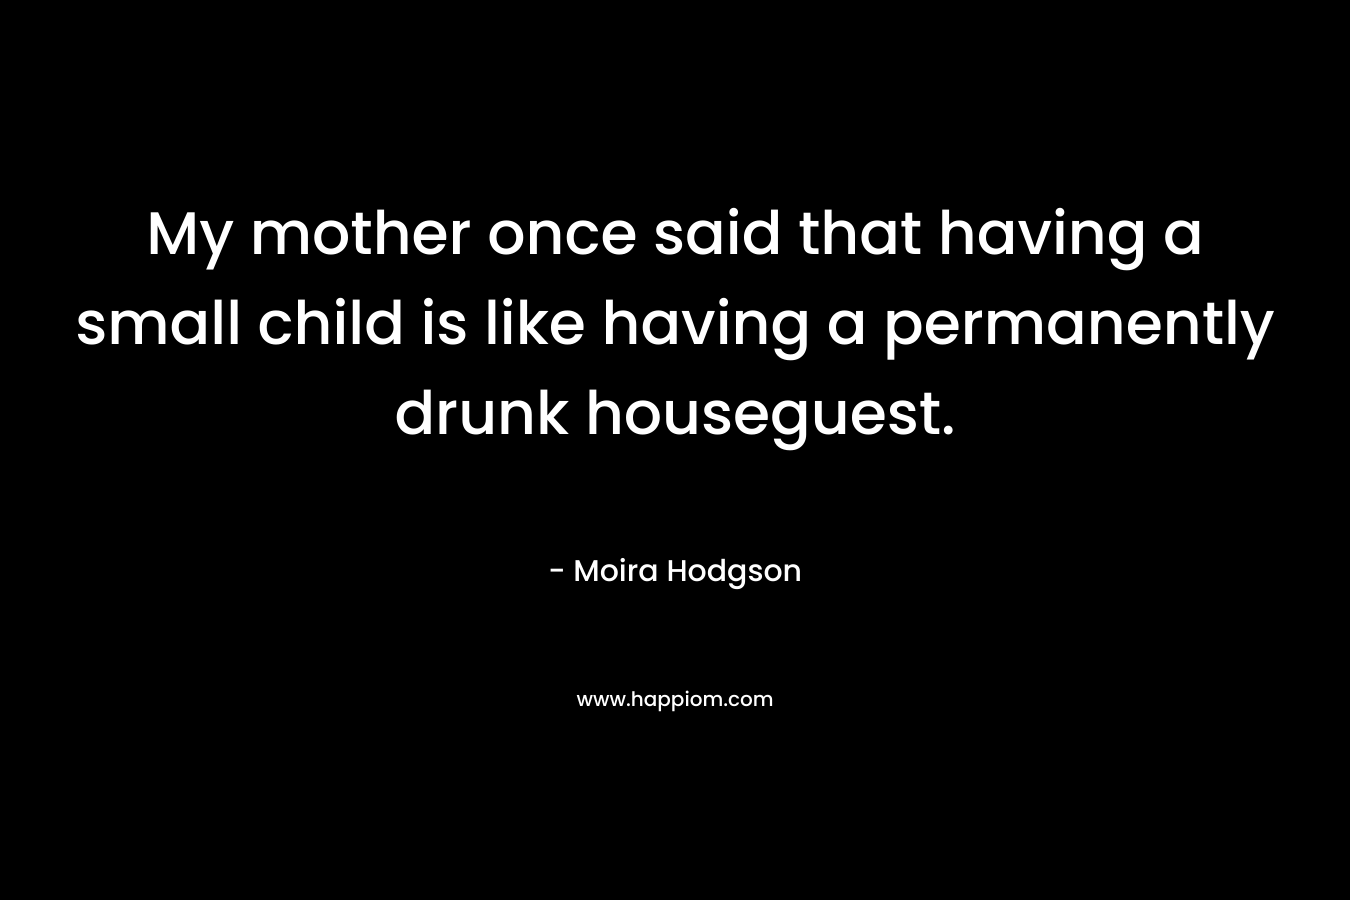 My mother once said that having a small child is like having a permanently drunk houseguest.